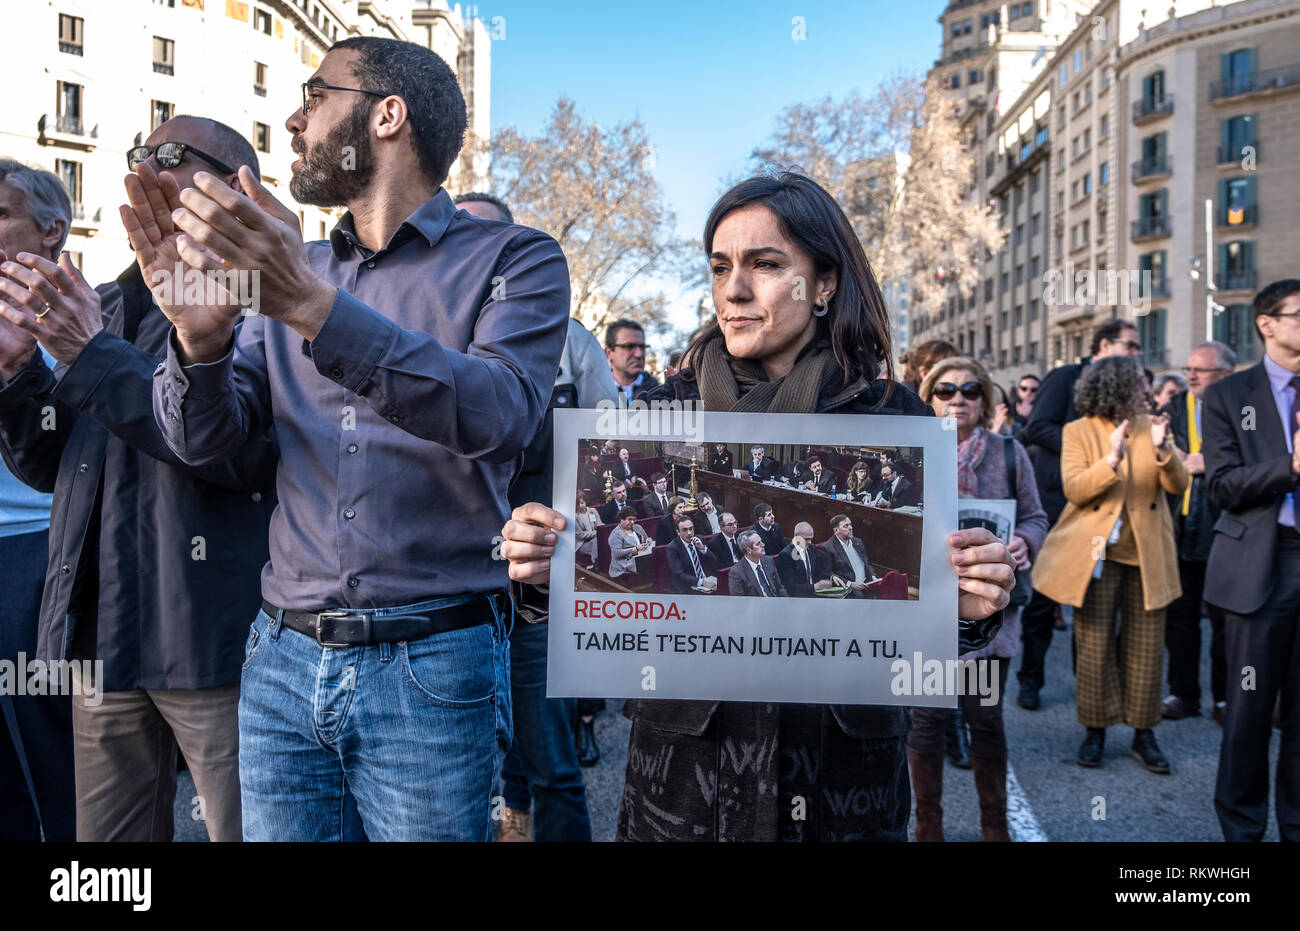 Barcelona, Spain. 12th Feb 2019. A worker from the Department of Economy and Finance is seen during the protest showing an image taken from TV showing the first portrait image of the political prisoners since they were arrested. Hundreds of workers and officials of the General office of Catalonia have gone out to show their solidarity with political prisoners on their first day of trial.  The workers of the Department of Economy have blocked the traffic of the Gran Vía during the protest. Credit: SOPA Images Limited/Alamy Live News Stock Photo